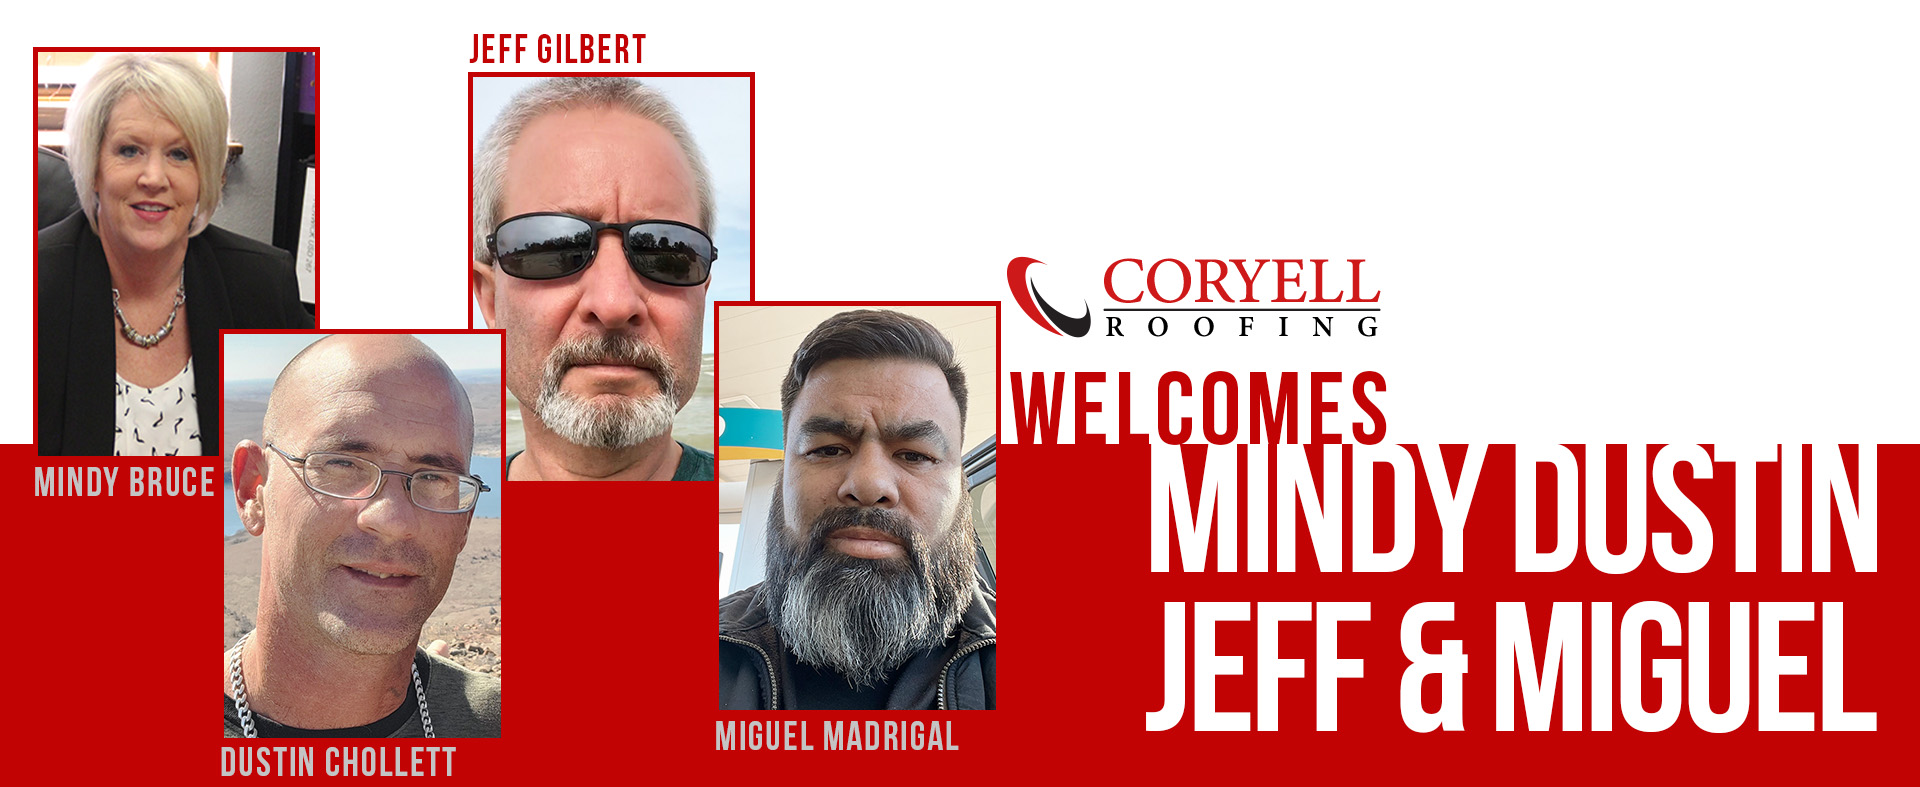 Coryell Roofing Welcomes Mindy, Dustin, Jeff, and Miguel